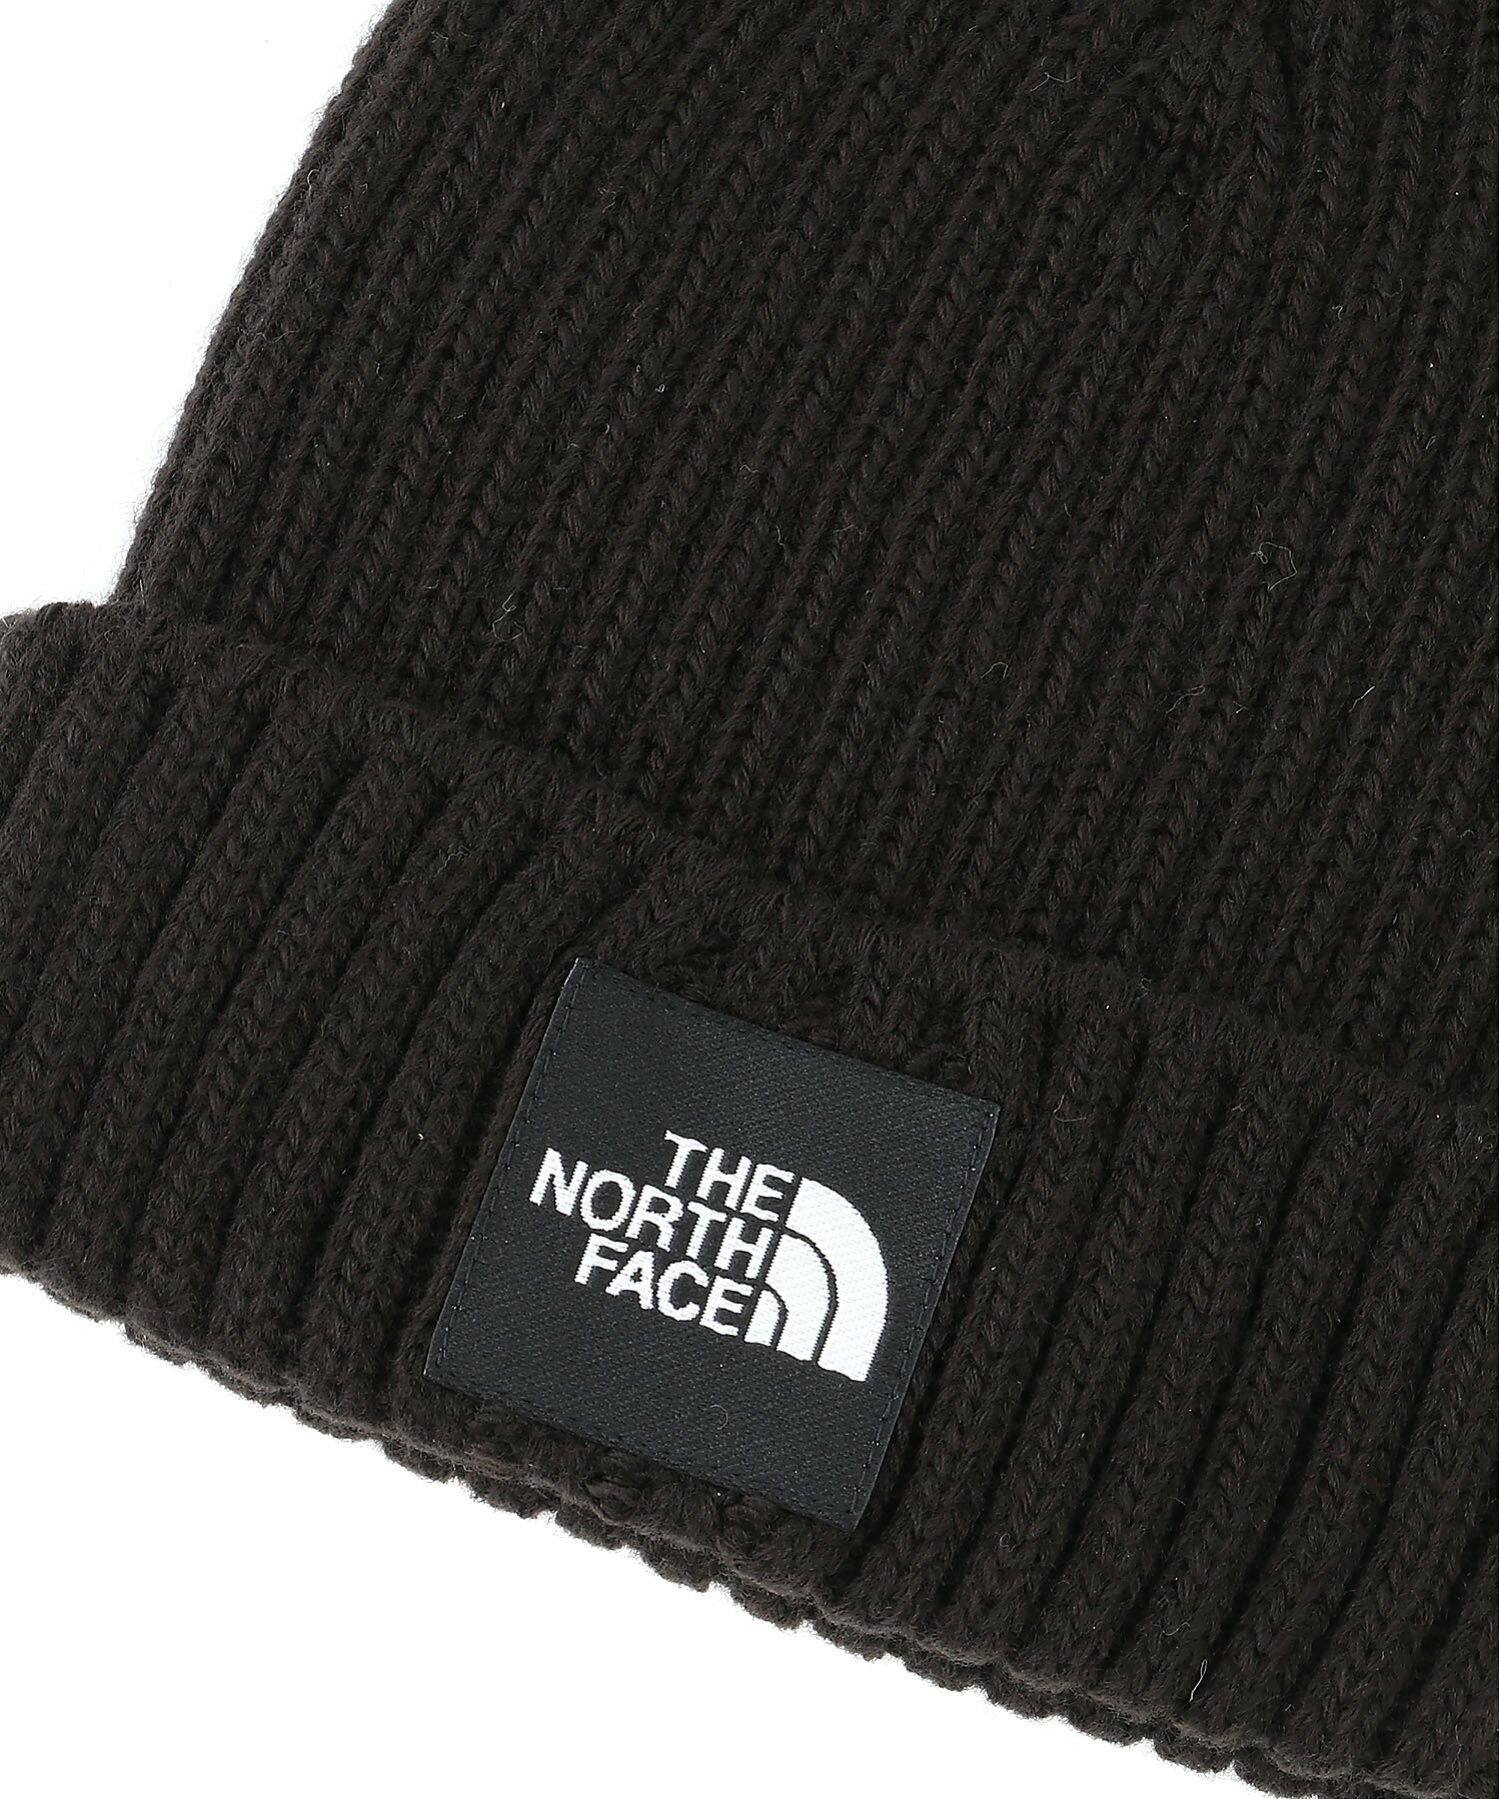 THE NORTH FACE/NNJ42320 キッズカプッチョリッド